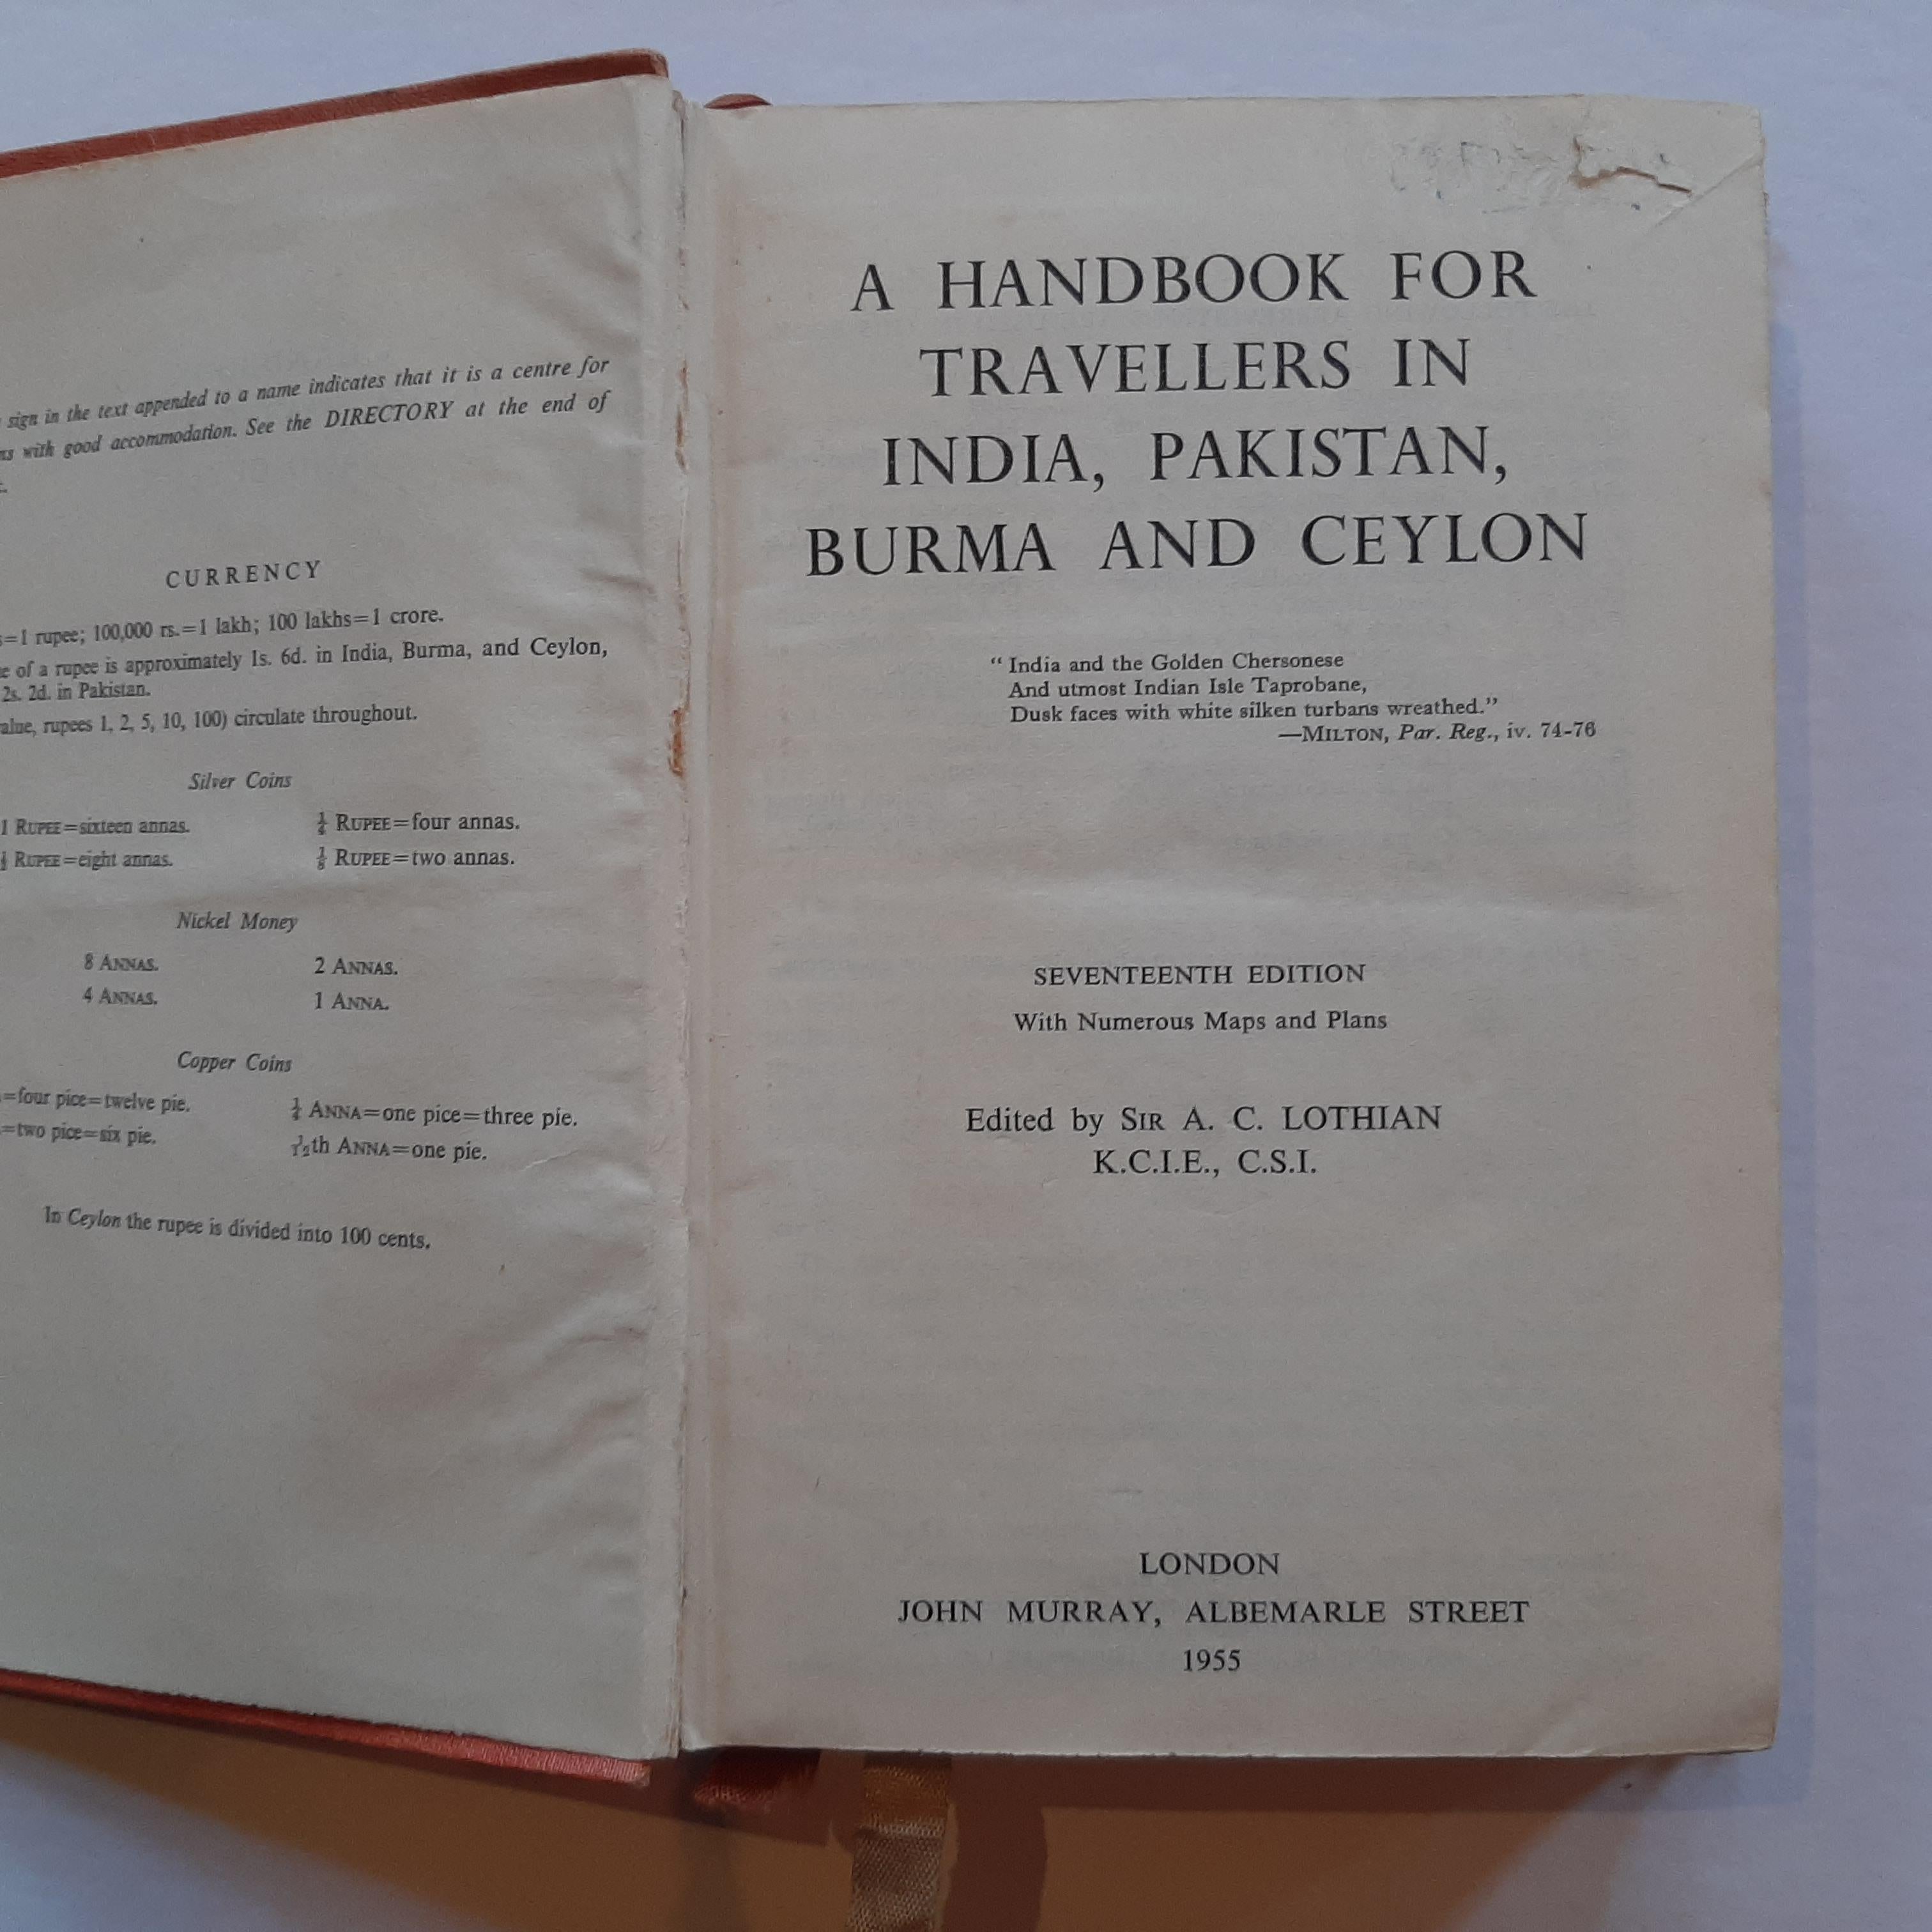 'A Handbook for Travellers in India, Pakistan, Burma and Ceylon' by A.C. Lothian. Published by John Murray, 1955.